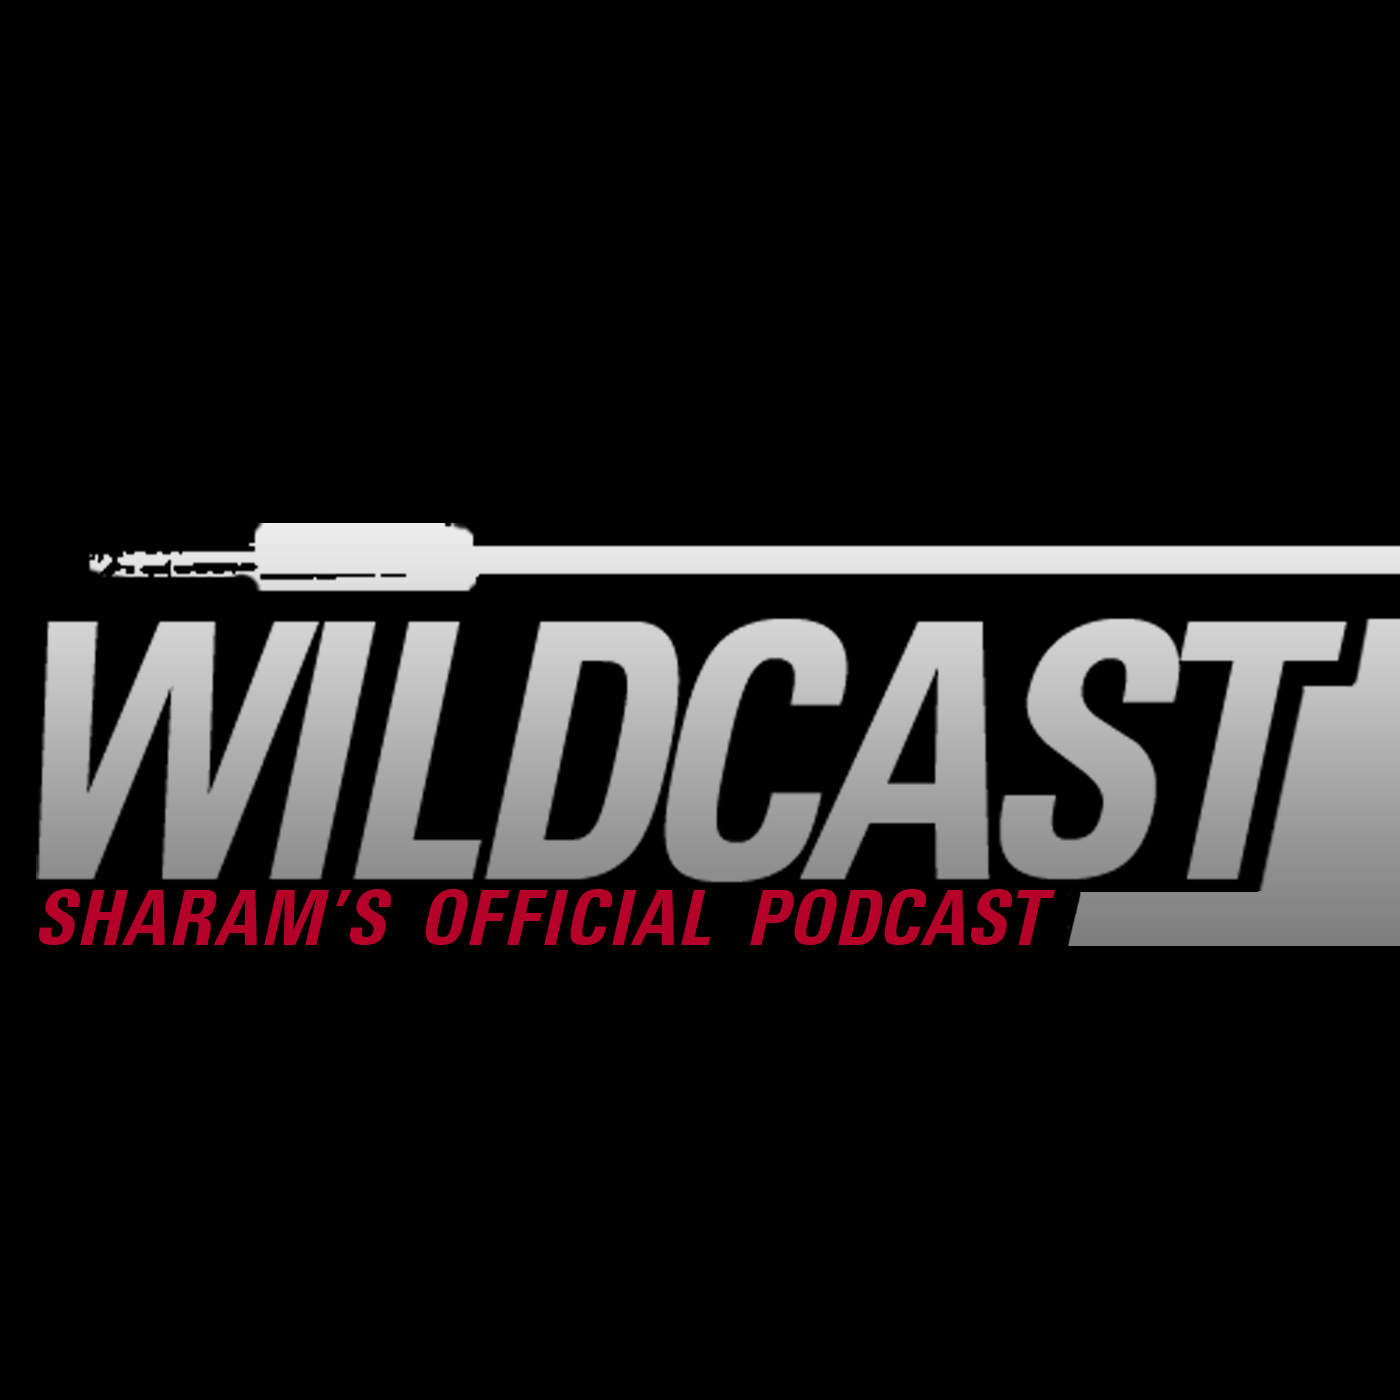 WILDCAST EPISODE 42 - All Techno Edition - Sharam's Official Podcast